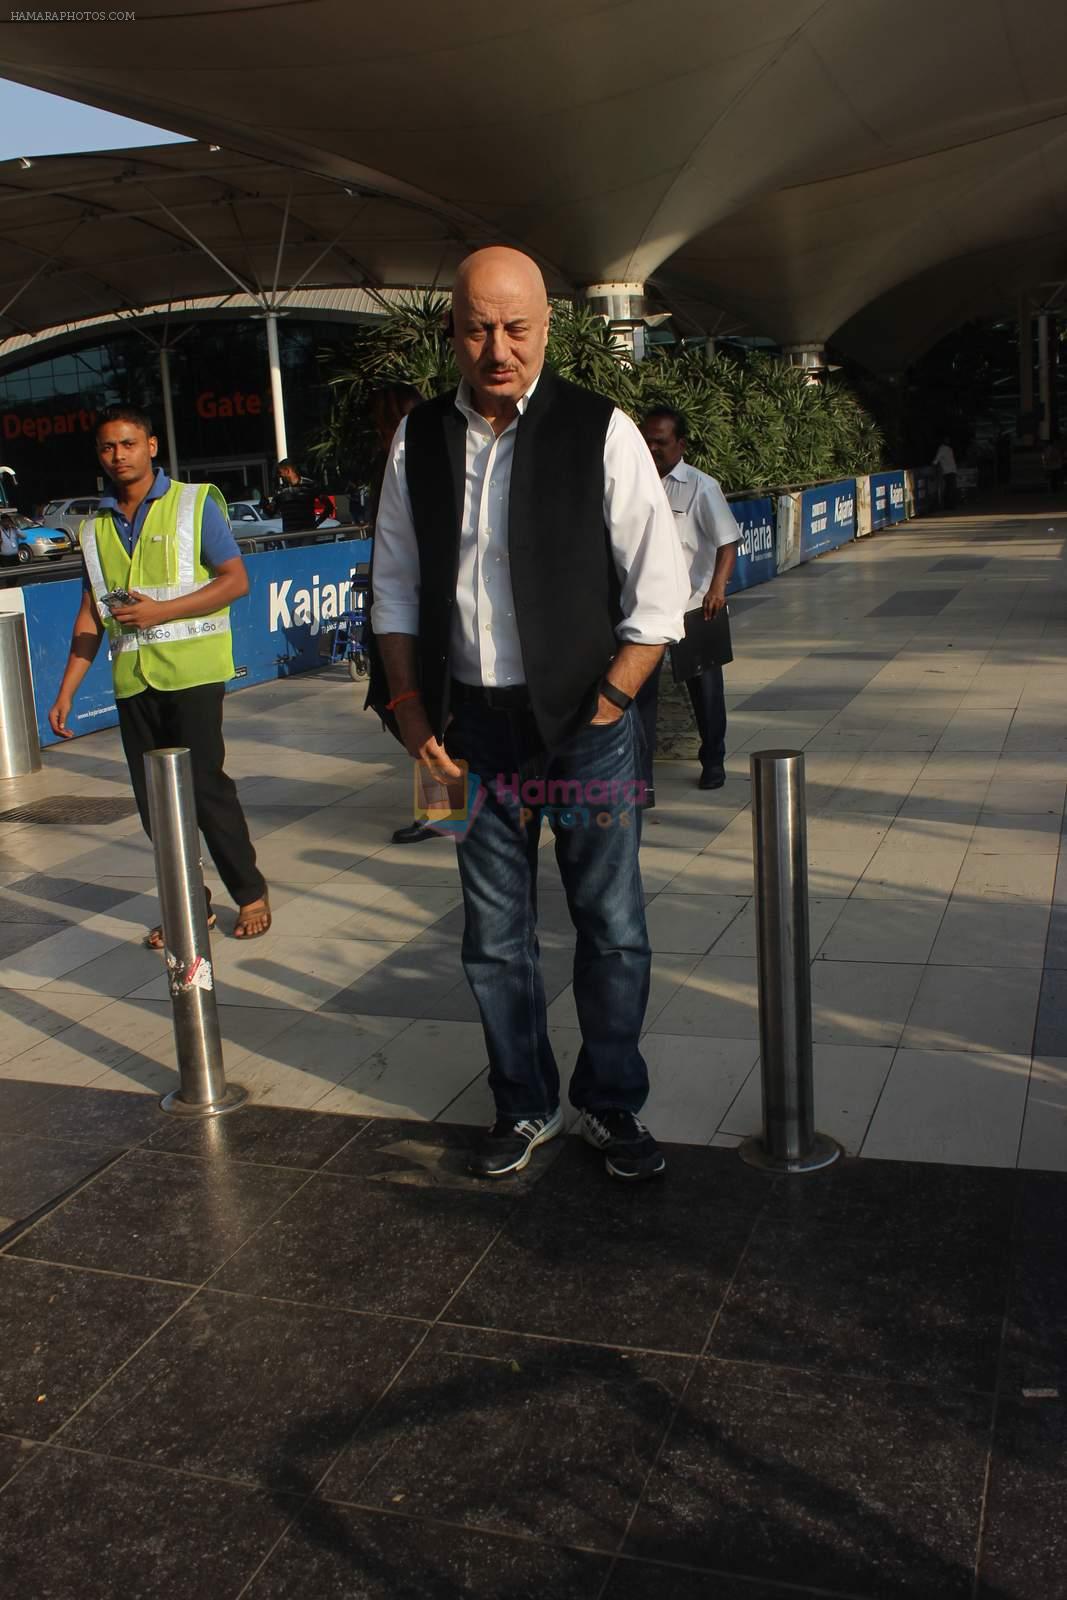 Anupam Kher snapped at the airport on 21st Jan 2016